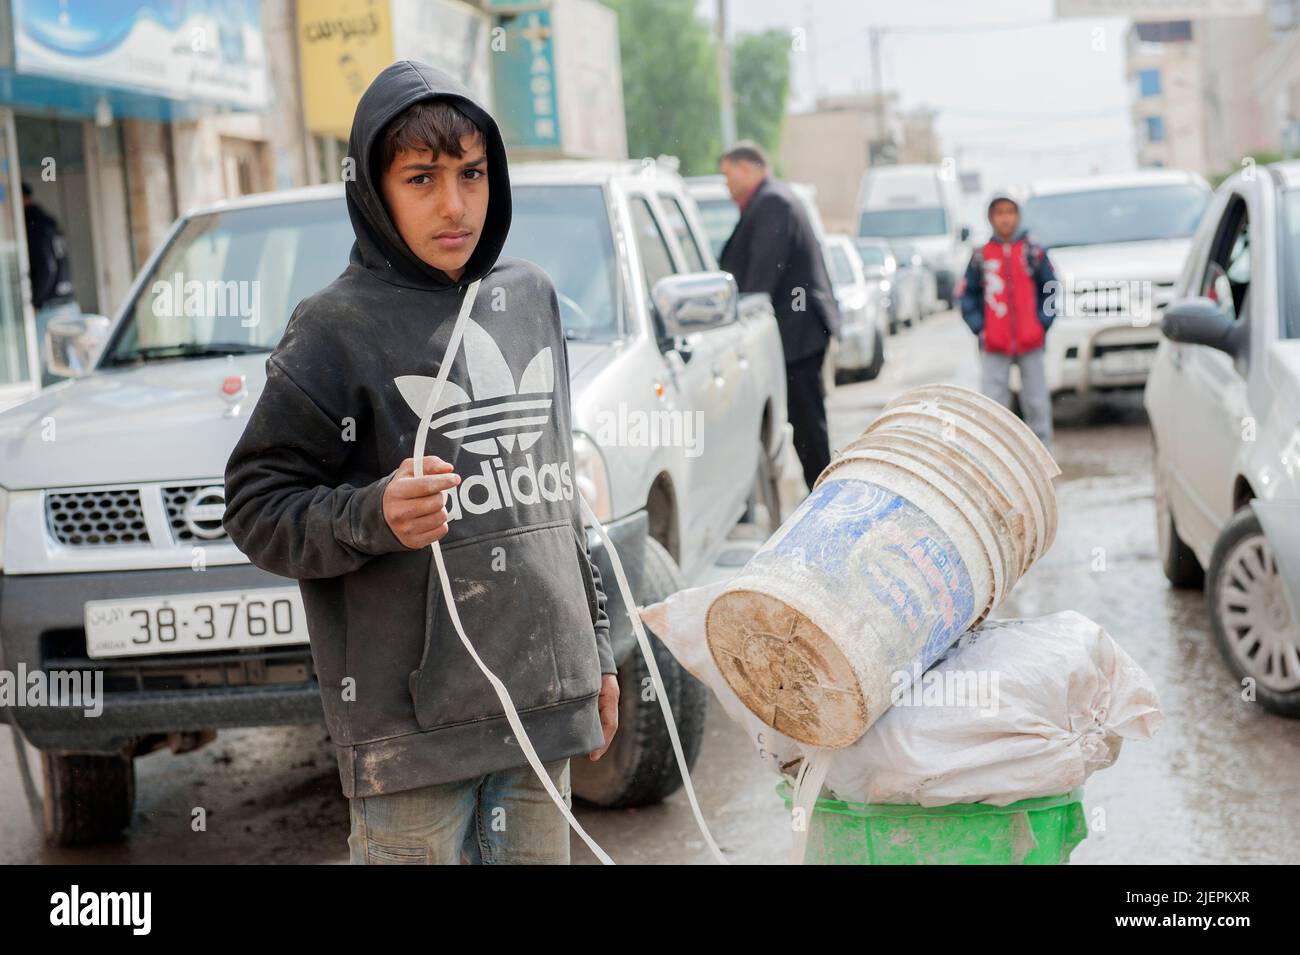 Al Mafraq, Jordan. Many Children and Teens, often refugee and migrant children from Syria, Iraq and Egypt have to do hard labour on the streets inside the informal economy to help their families earn a minimum living standard, which often tays below poverty lines. Stock Photo